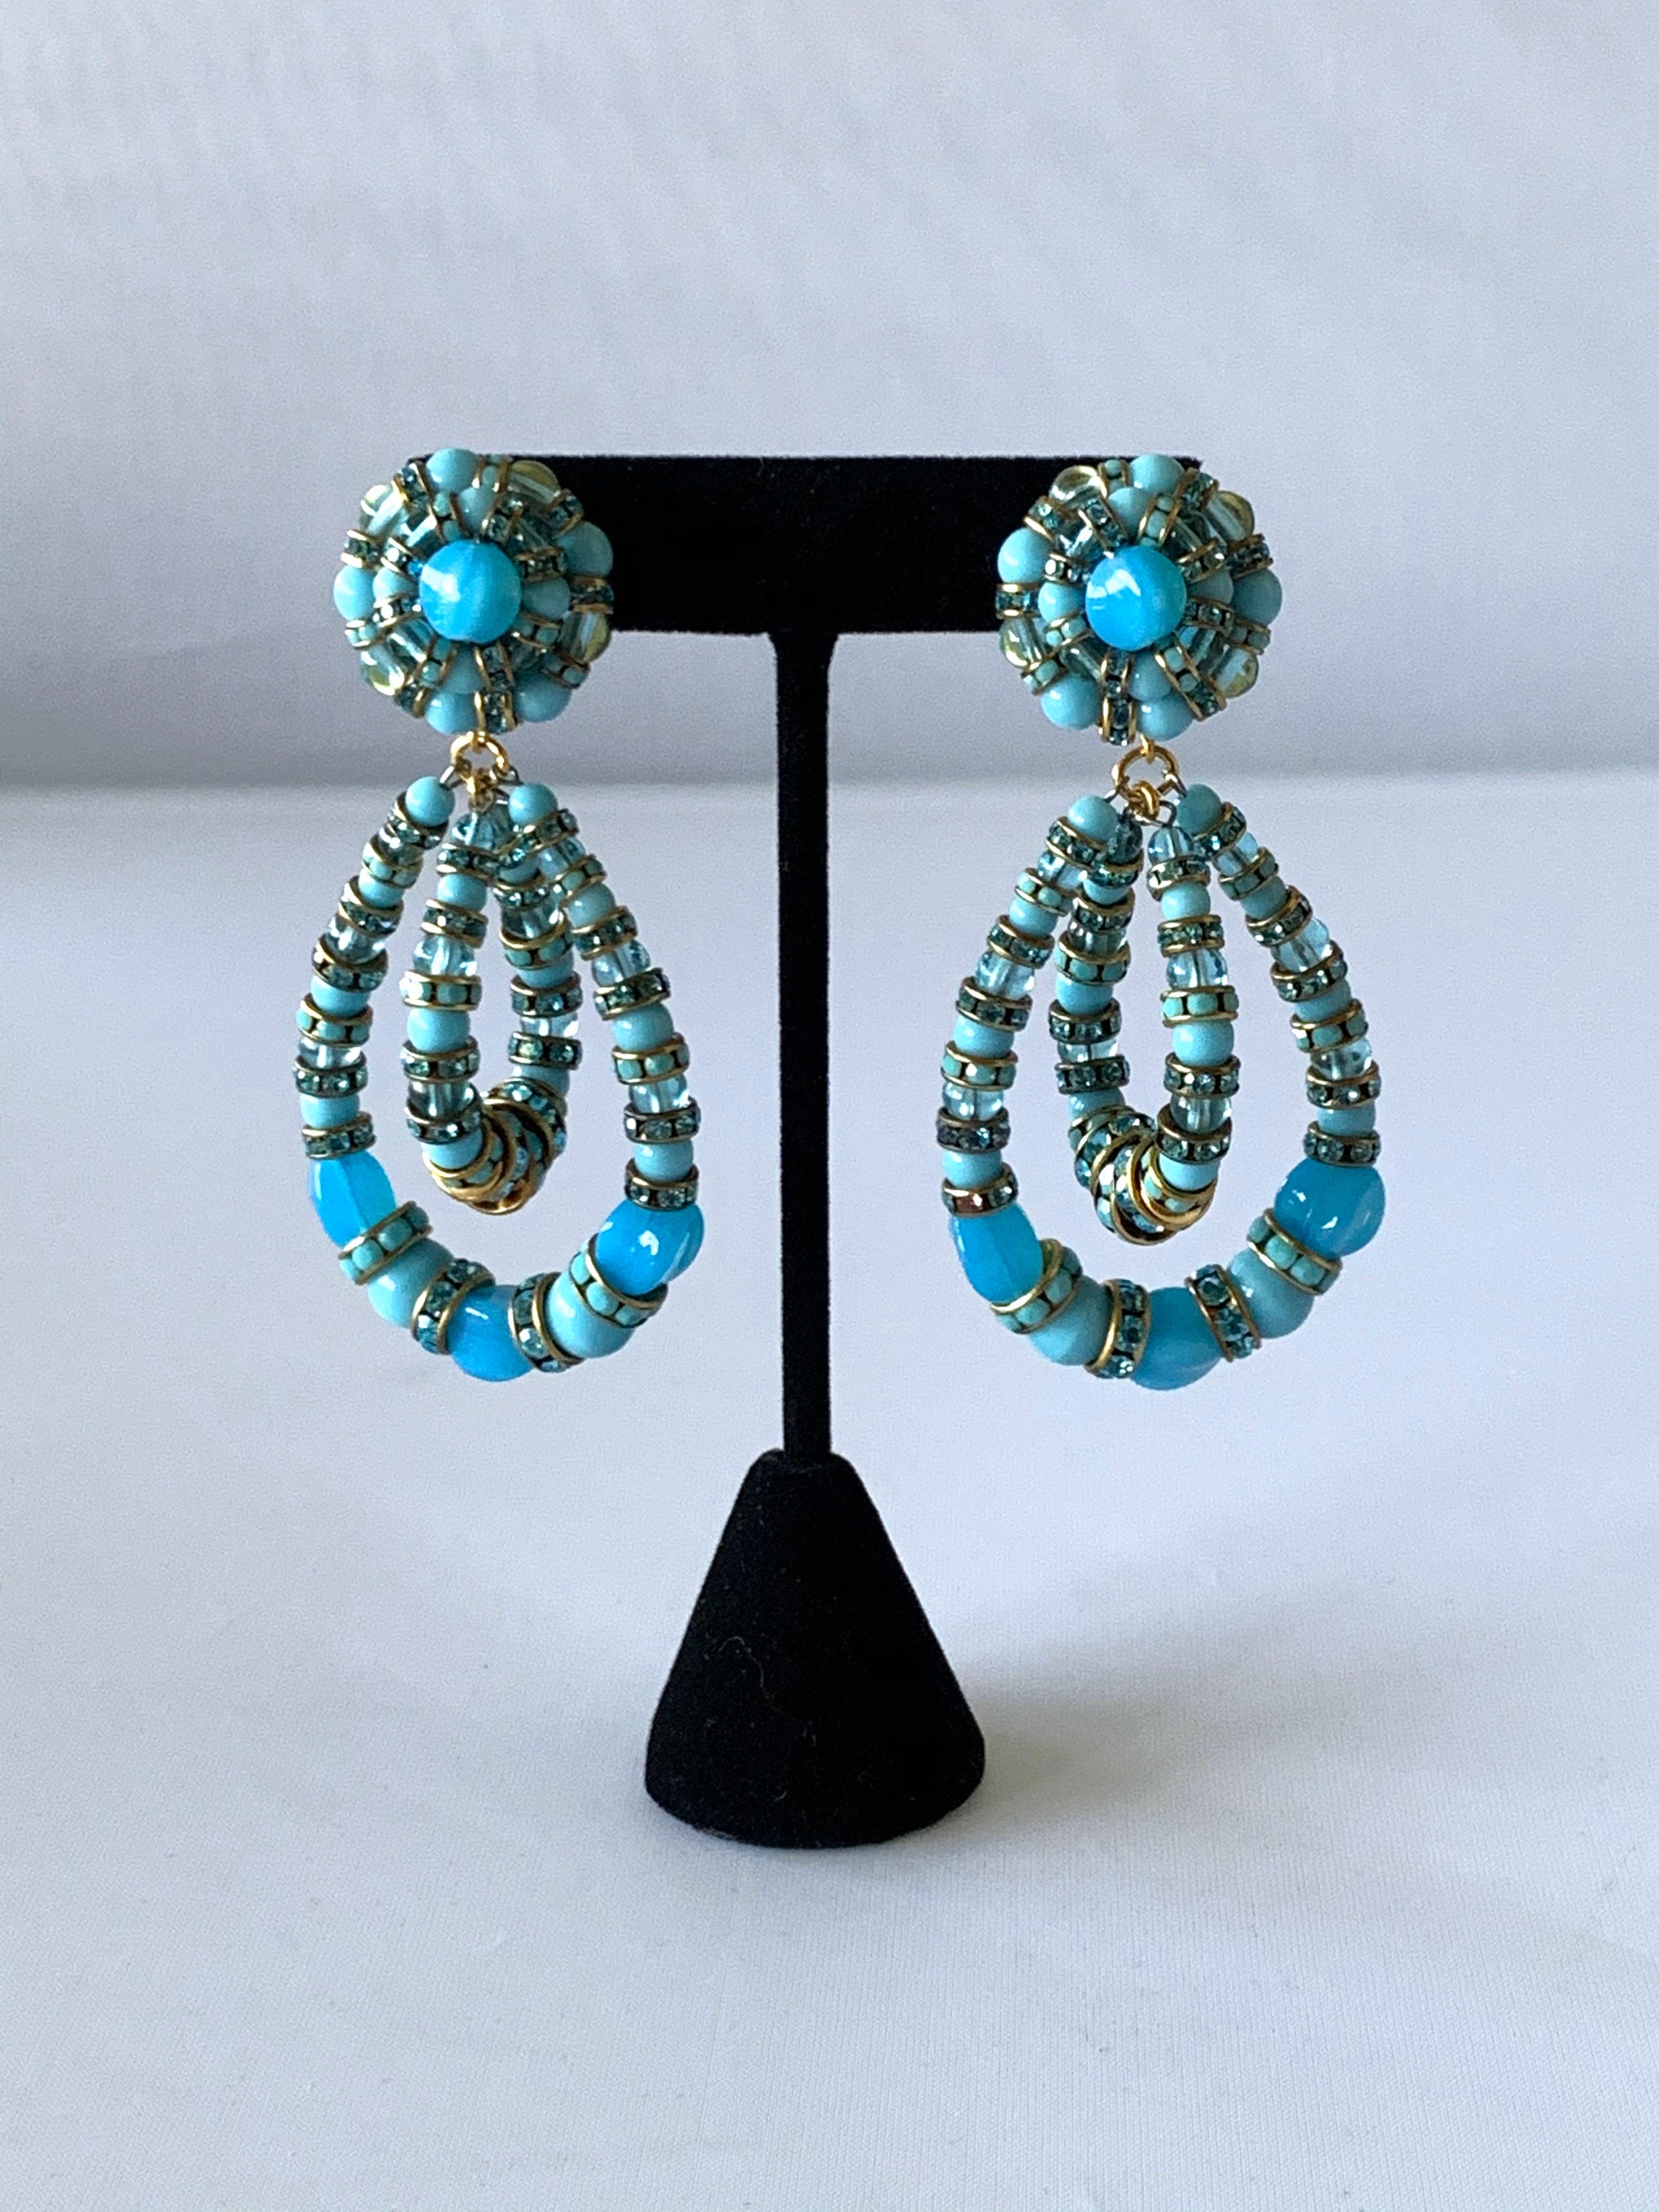 Contemporary handmade turquoise architectural Swarovski crystal statement earrings - the clip-on earrings feature two double hoops with handmade multi turquoise glass beads and Swarovski crystal rondelles. Made in Paris France, by F. Montague.

